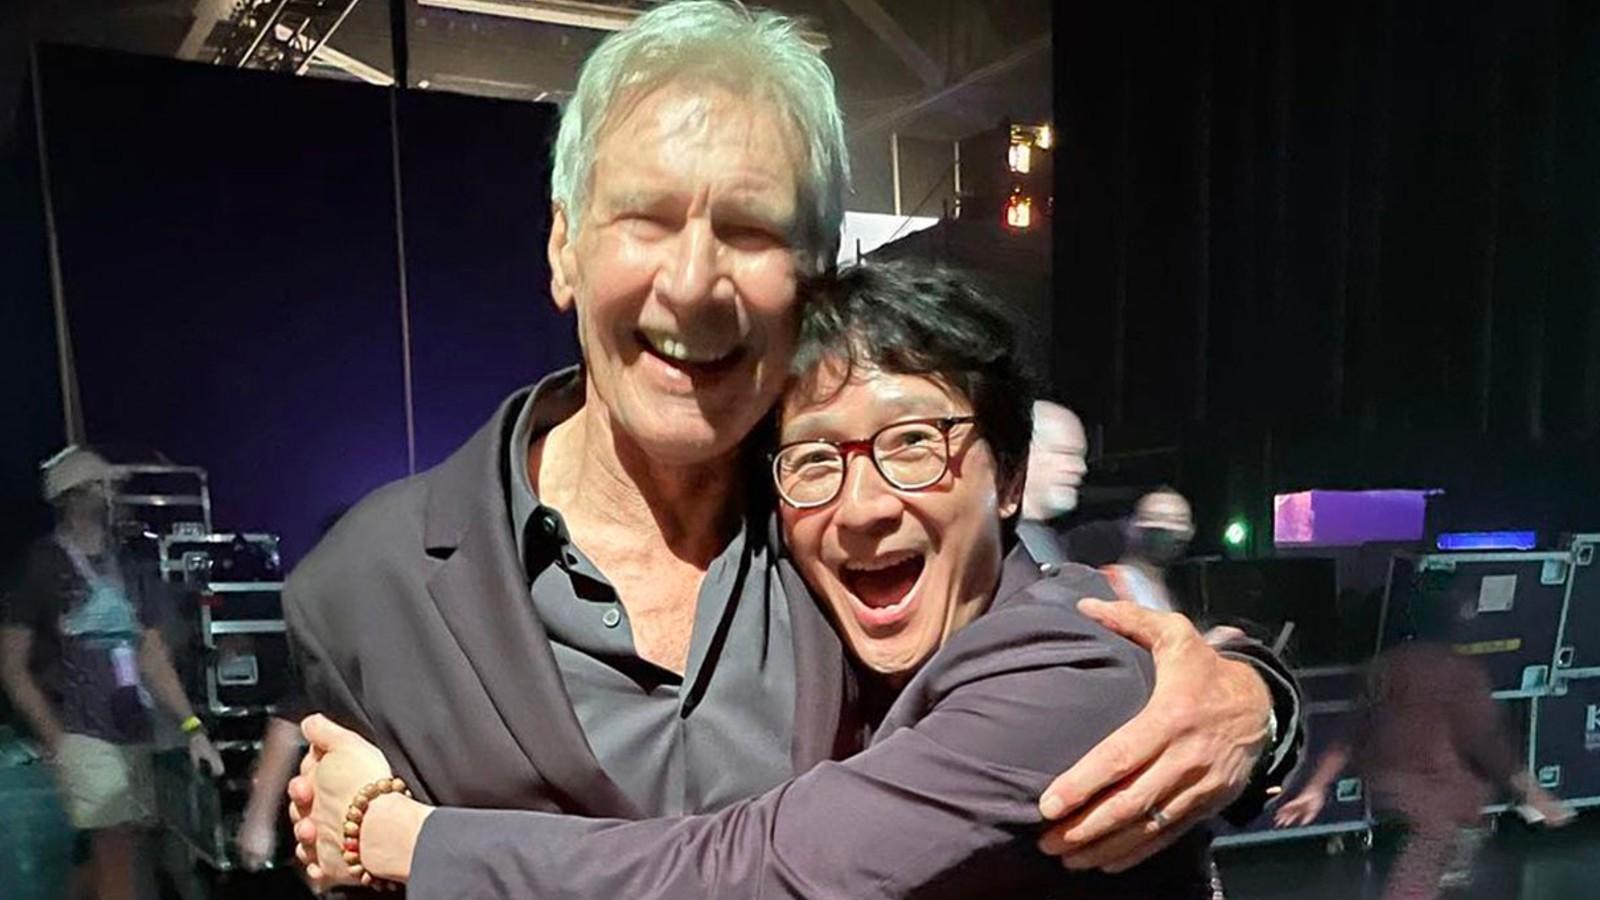 Harrison Ford and Ke Huy Quan at an Indiana Jones 5 event